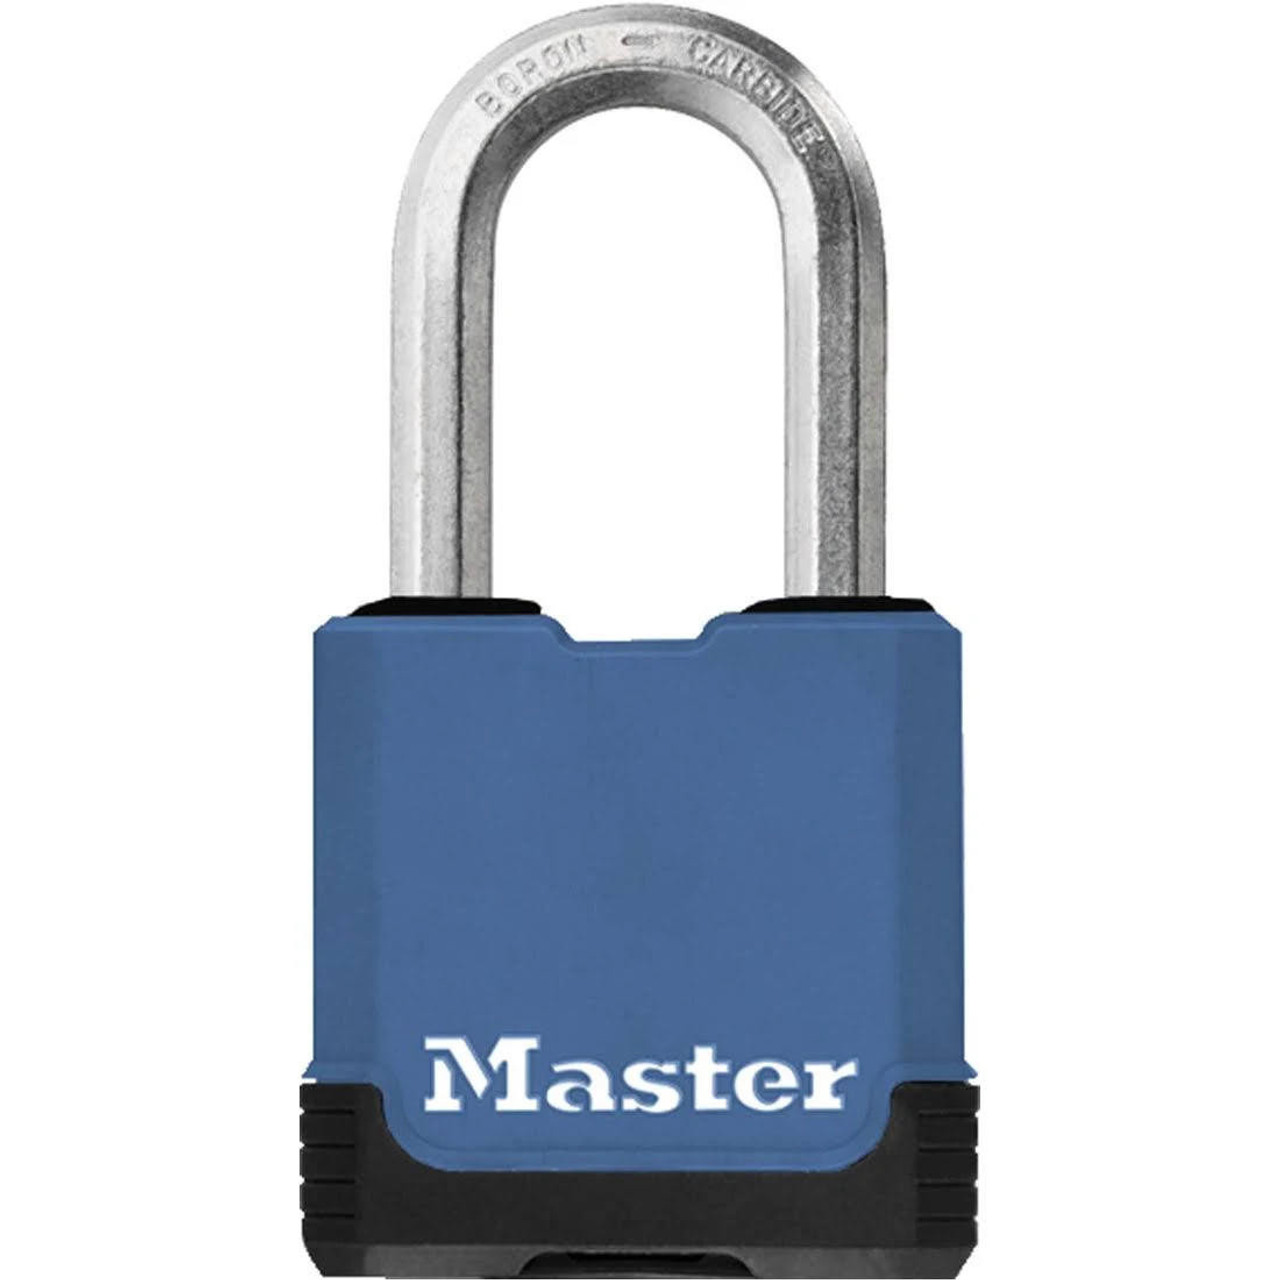 Master Lock Master Excell Padlock 45mm Shackle - M116DLFAU